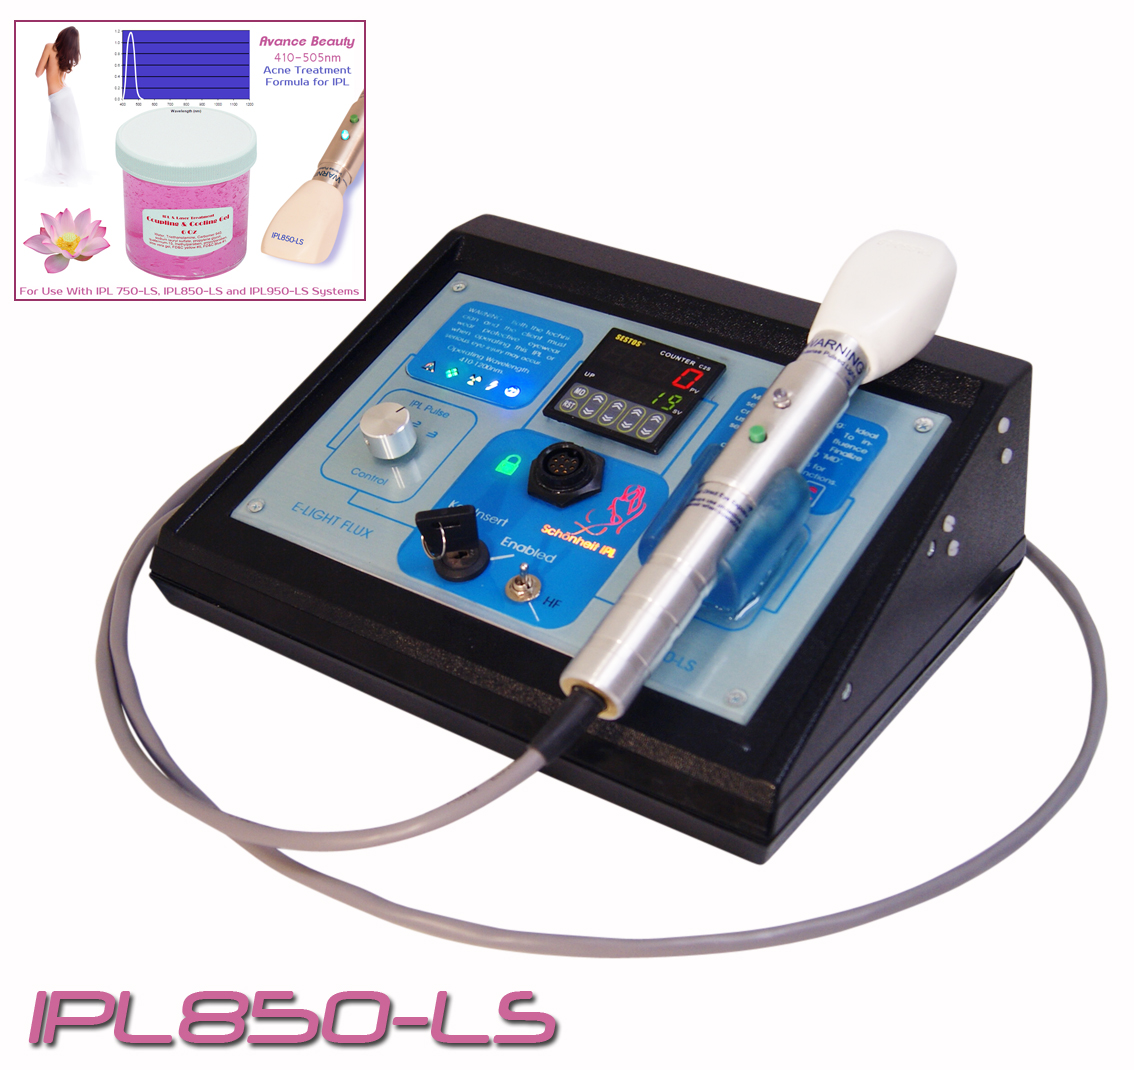 IPL850-LS Acne Treatment Filtering Gel Kit 400-505nm with Beauty Treatment Machine, System, Device.  642057128575